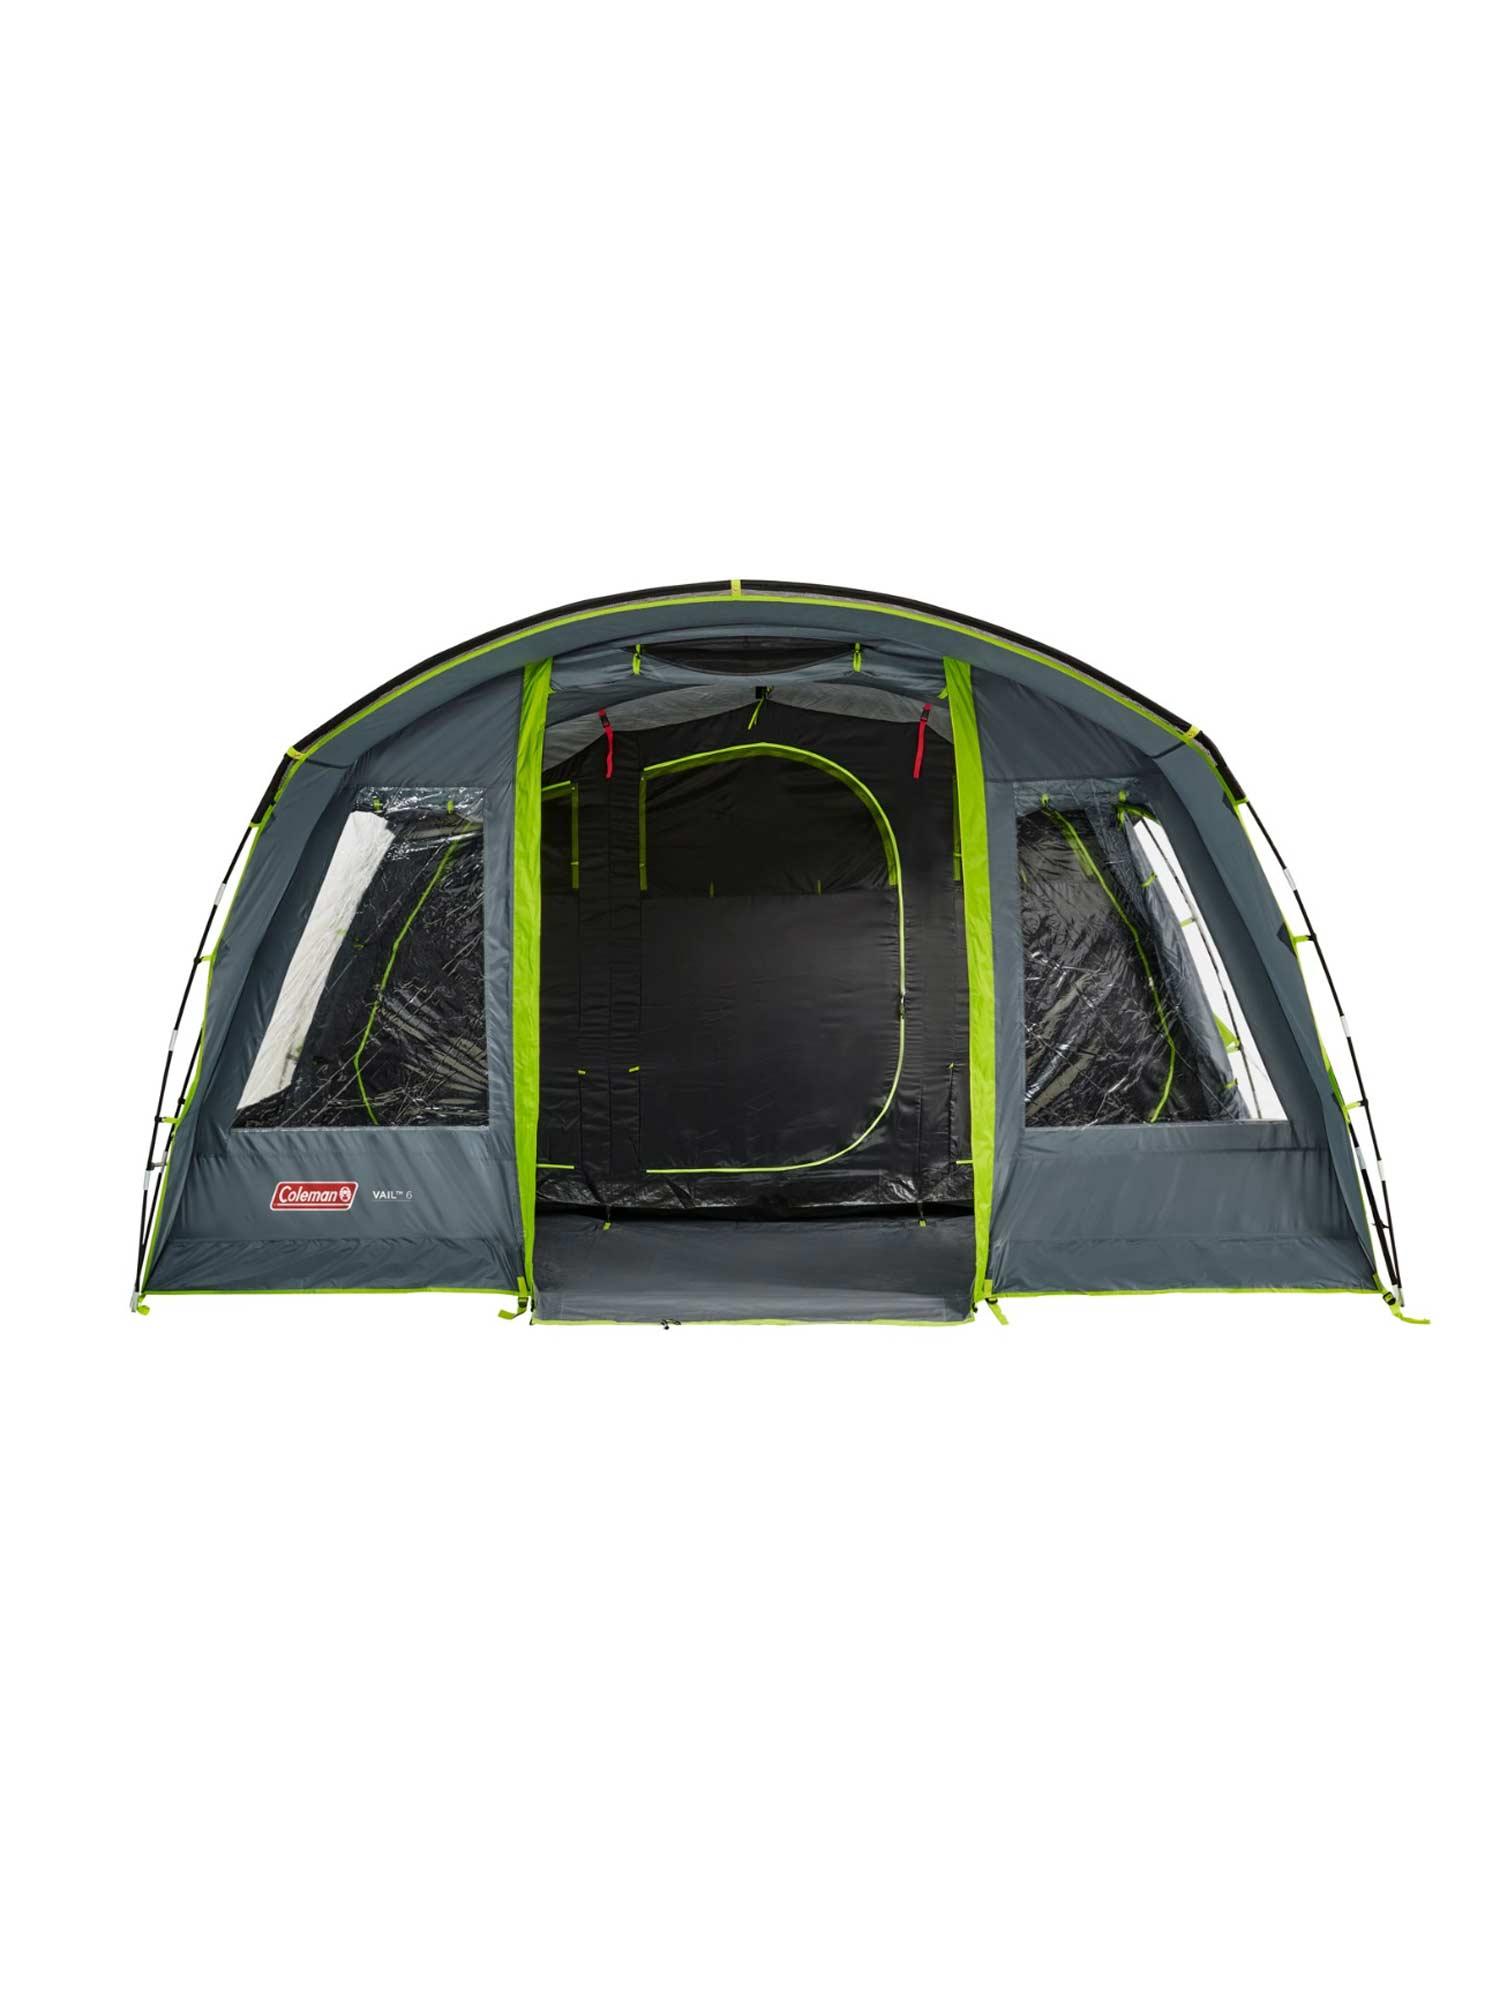 Selected image for COLEMAN Šator Vail 6 Tent siva